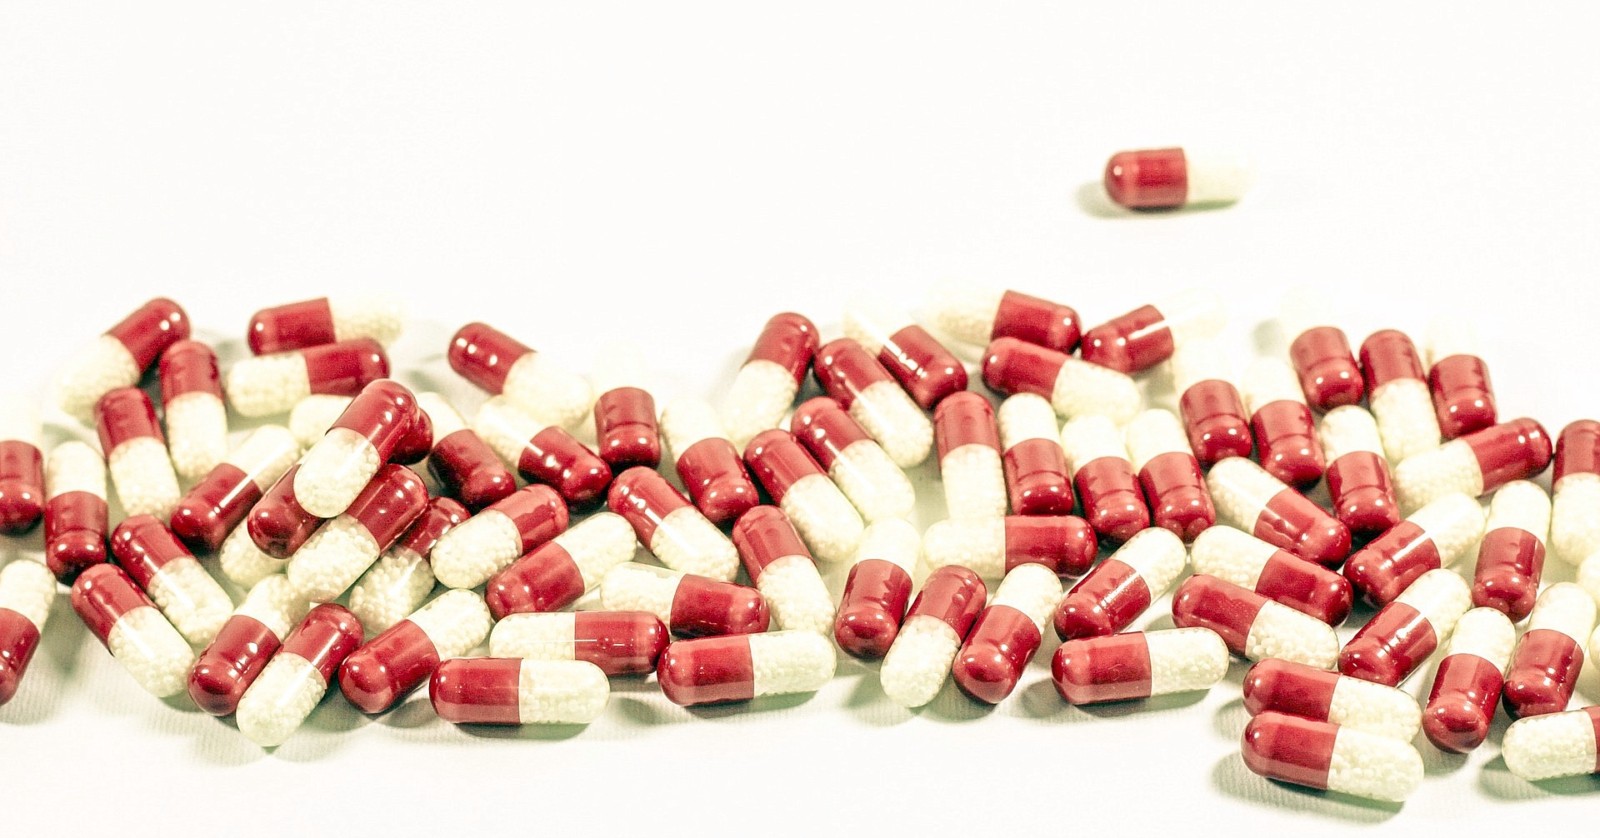 Red-white medical capsules filled with a white substance spread on a table